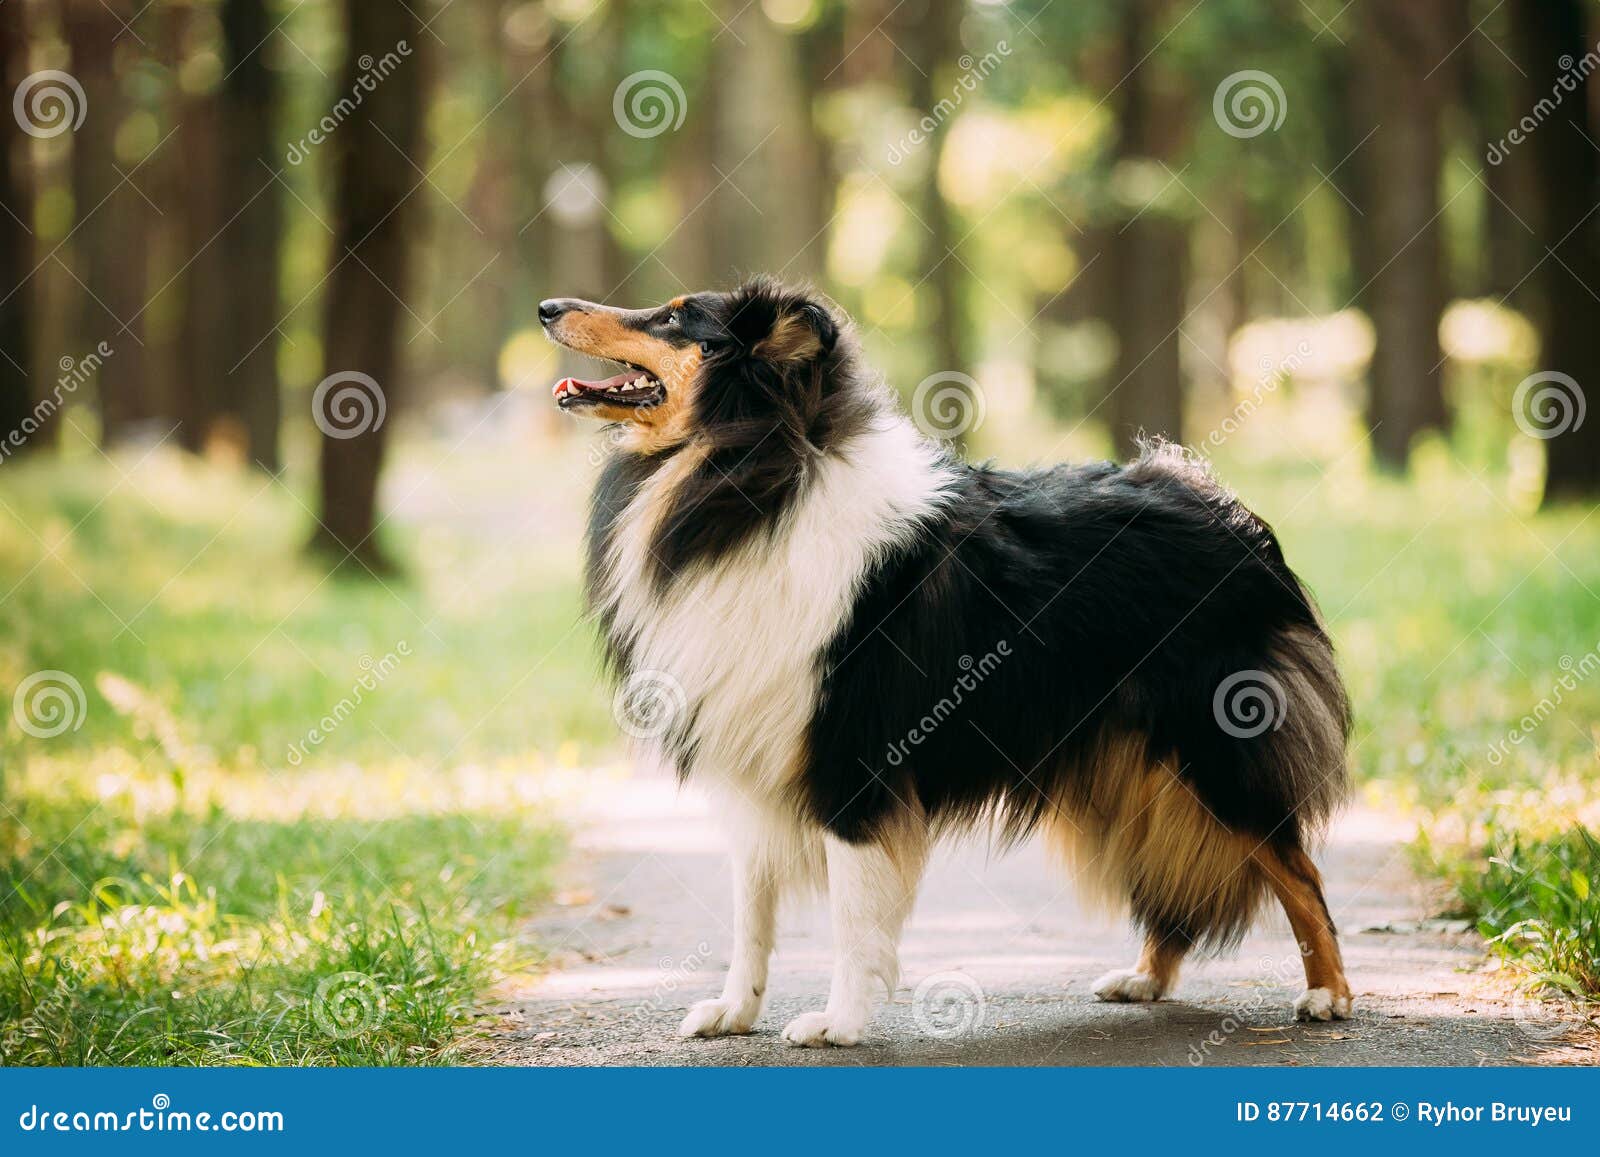 Scottish Rough Long Haired Collie Lassie Adult Dog Sitting On Park